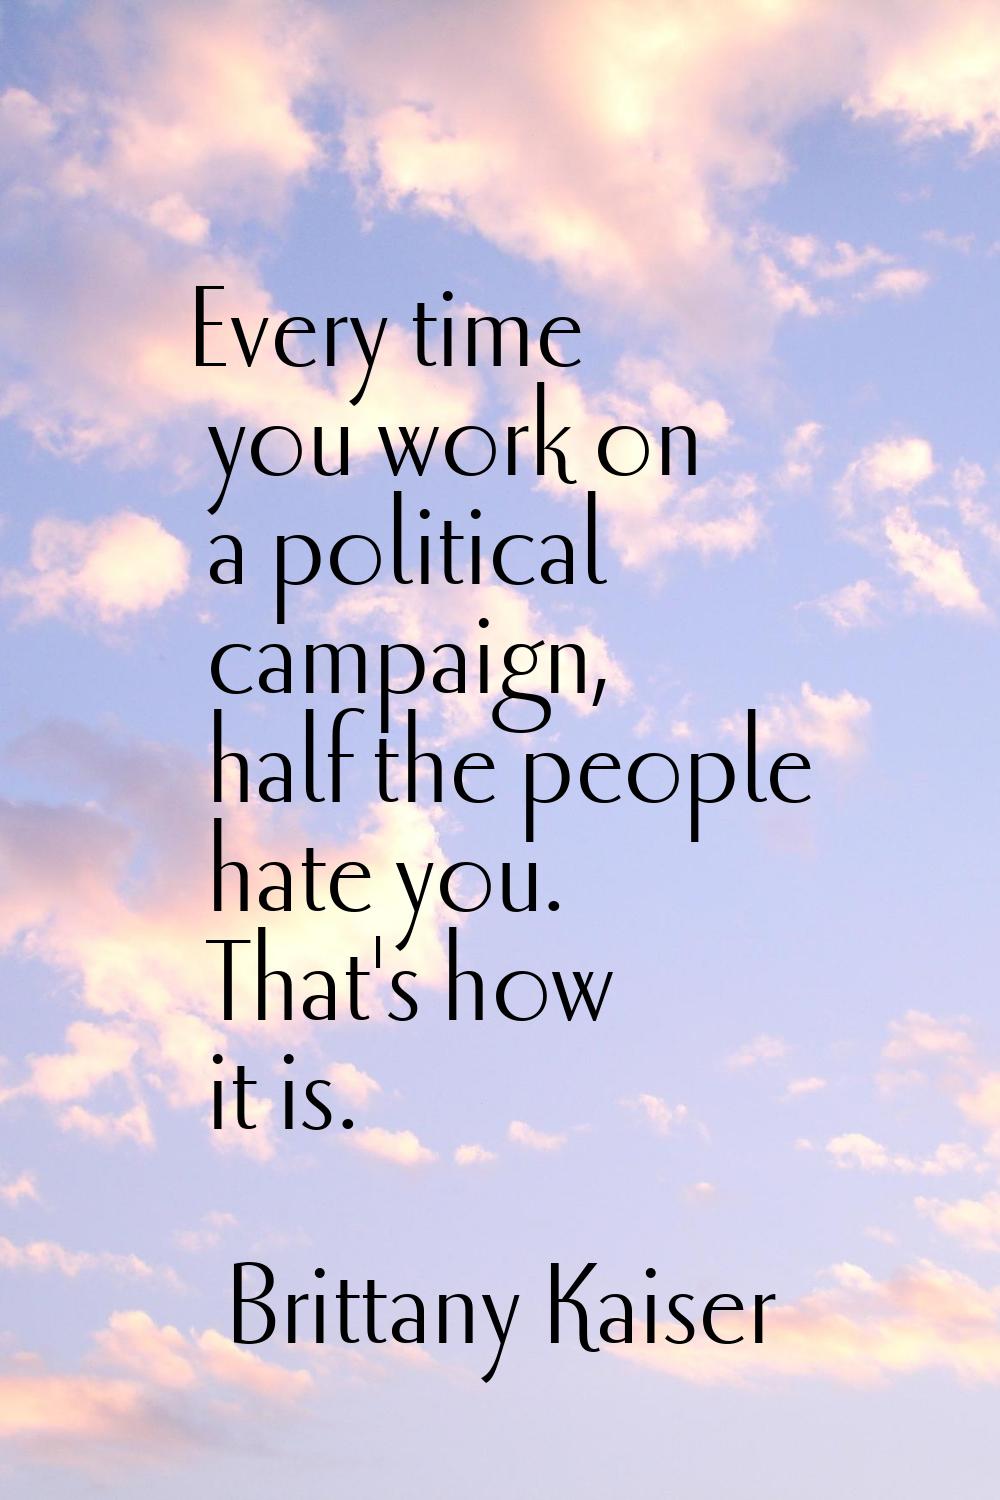 Every time you work on a political campaign, half the people hate you. That's how it is.